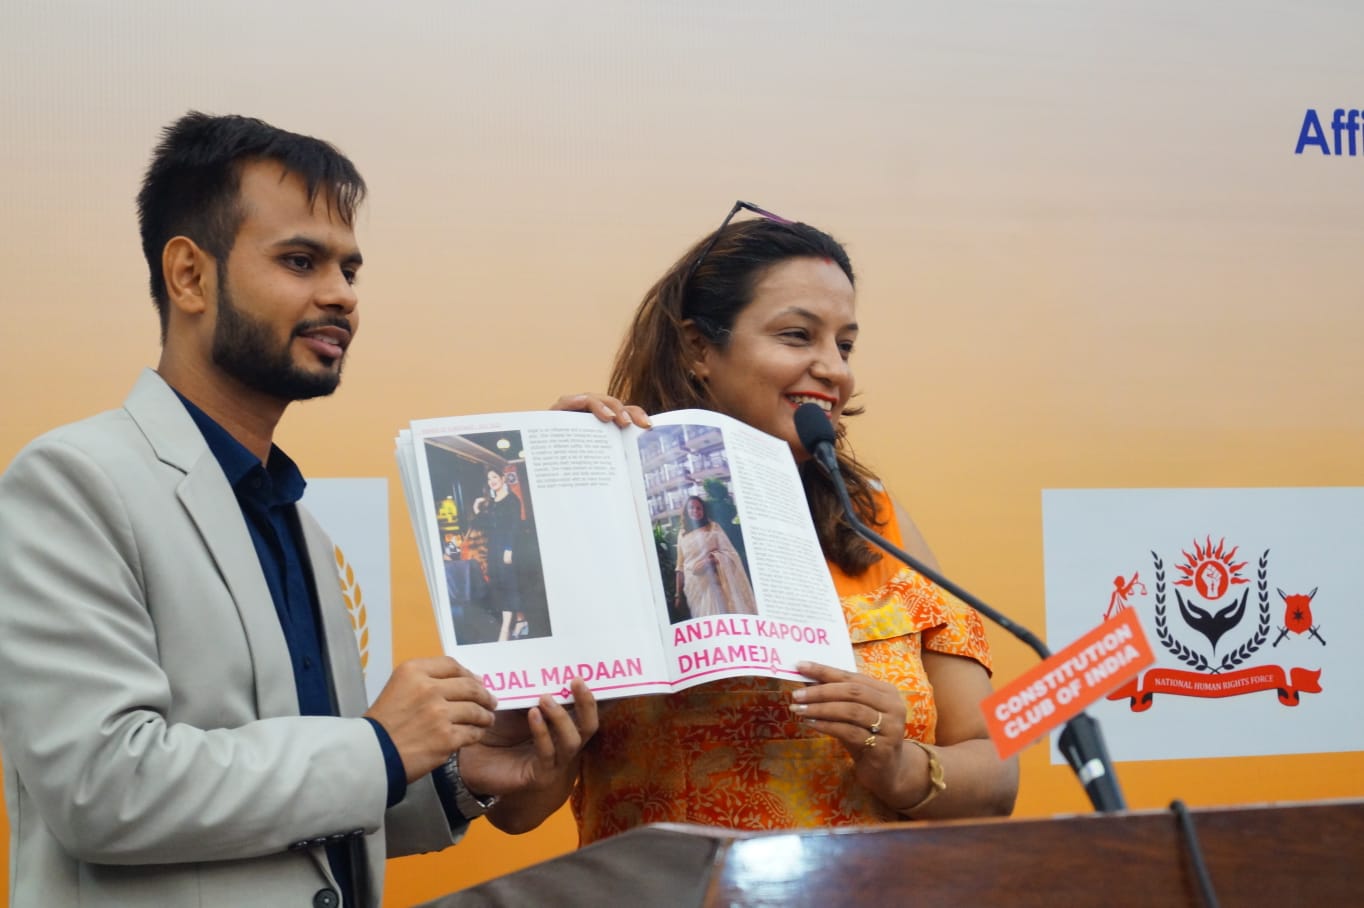 Vipin Khutail the founder of Being Topper , launched Women Of Substance Magazine. The magazine's launch was celebration of empowering women and recognizing their invaluable contributions to society. With a focus on highlighting stories of accomplished women from various fields.